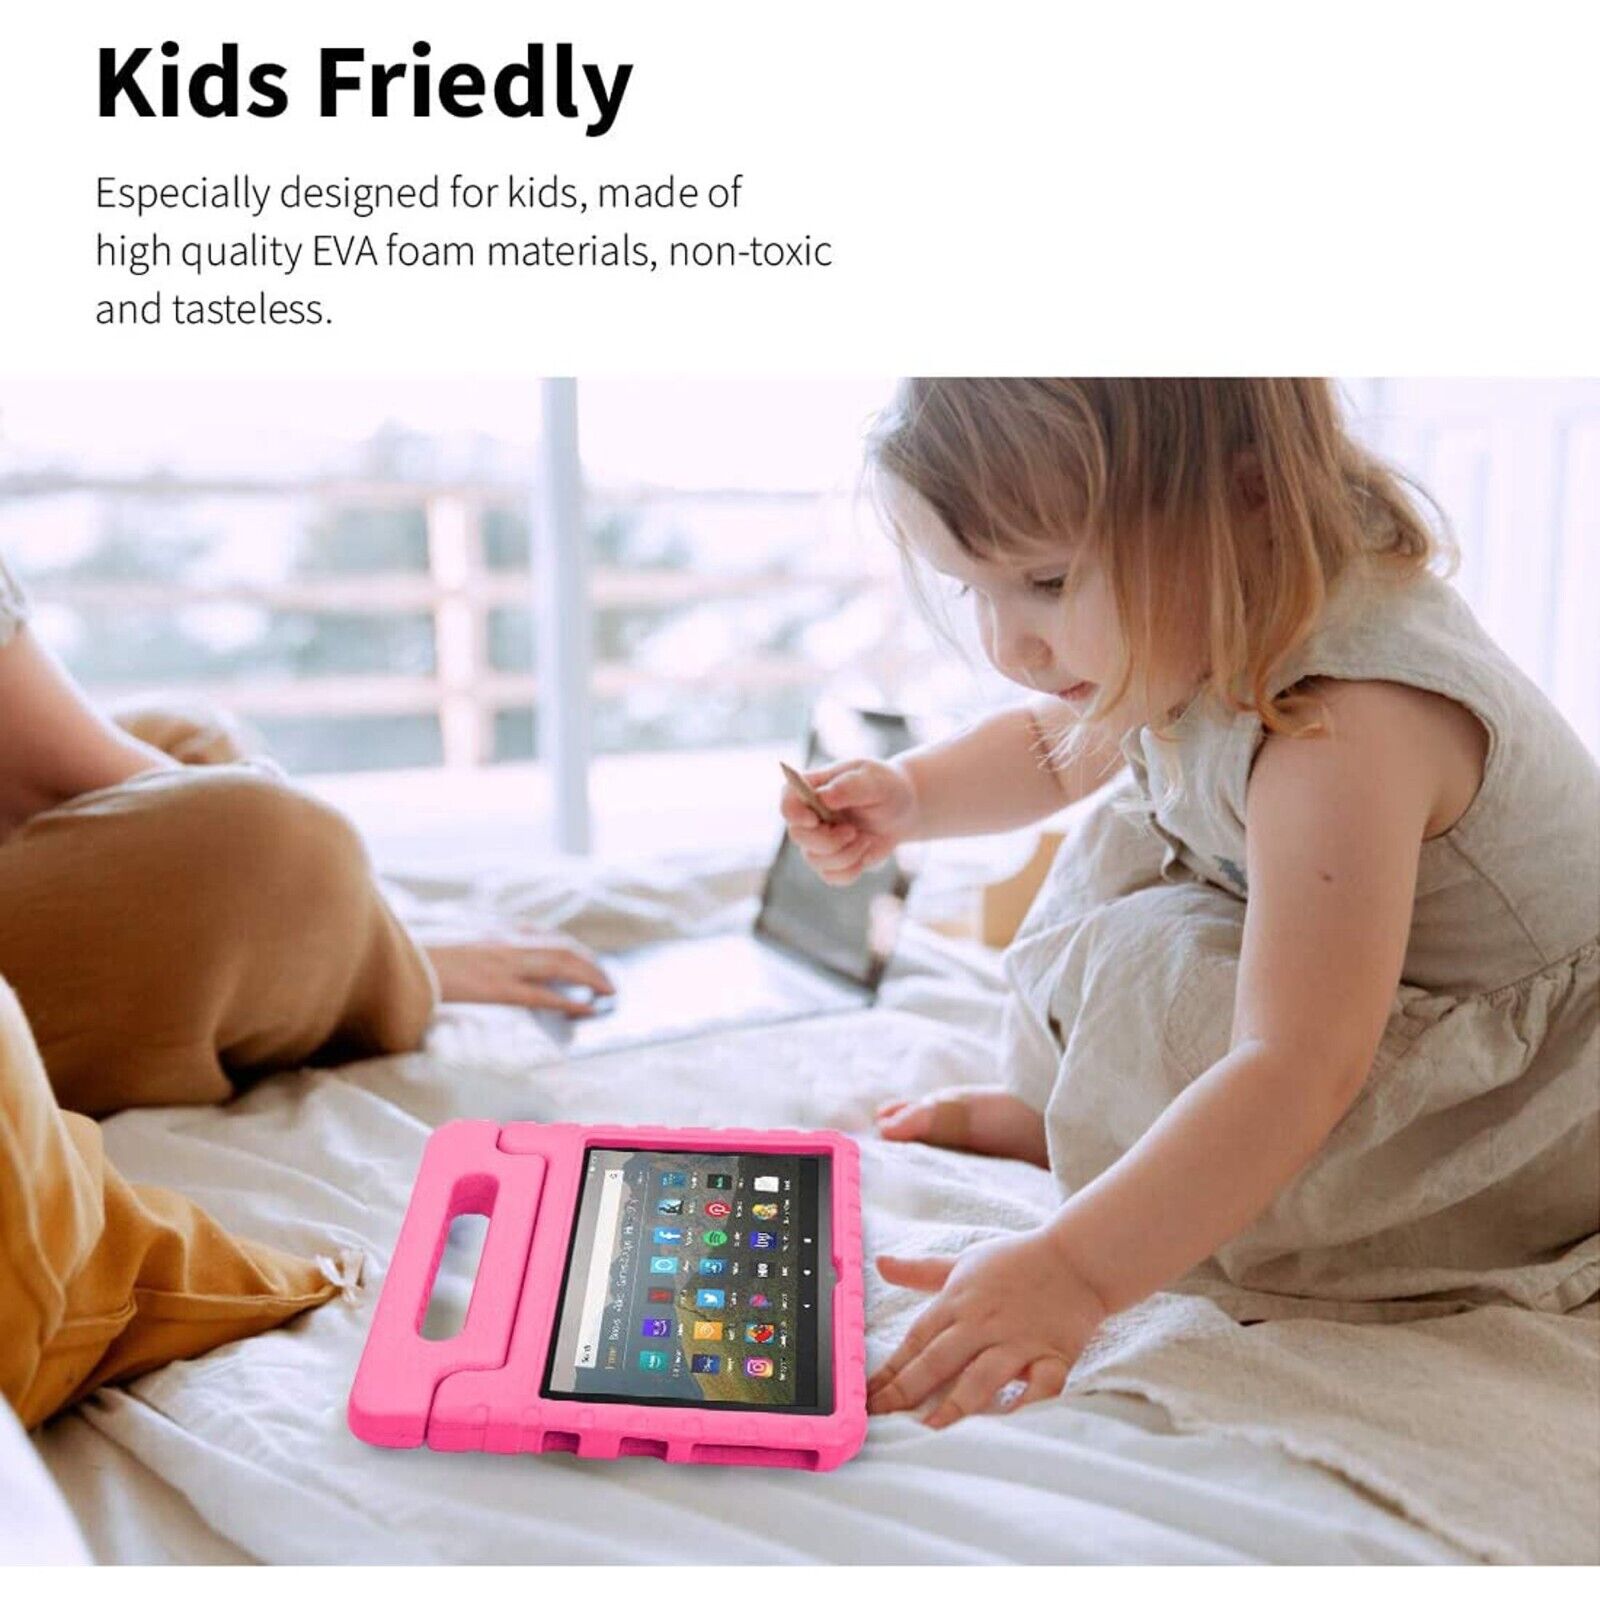 For Amazon Fire HD 8 Plus 2020 Kids Case Shockproof Cover With Stand - Pink-www.firsthelptech.ie